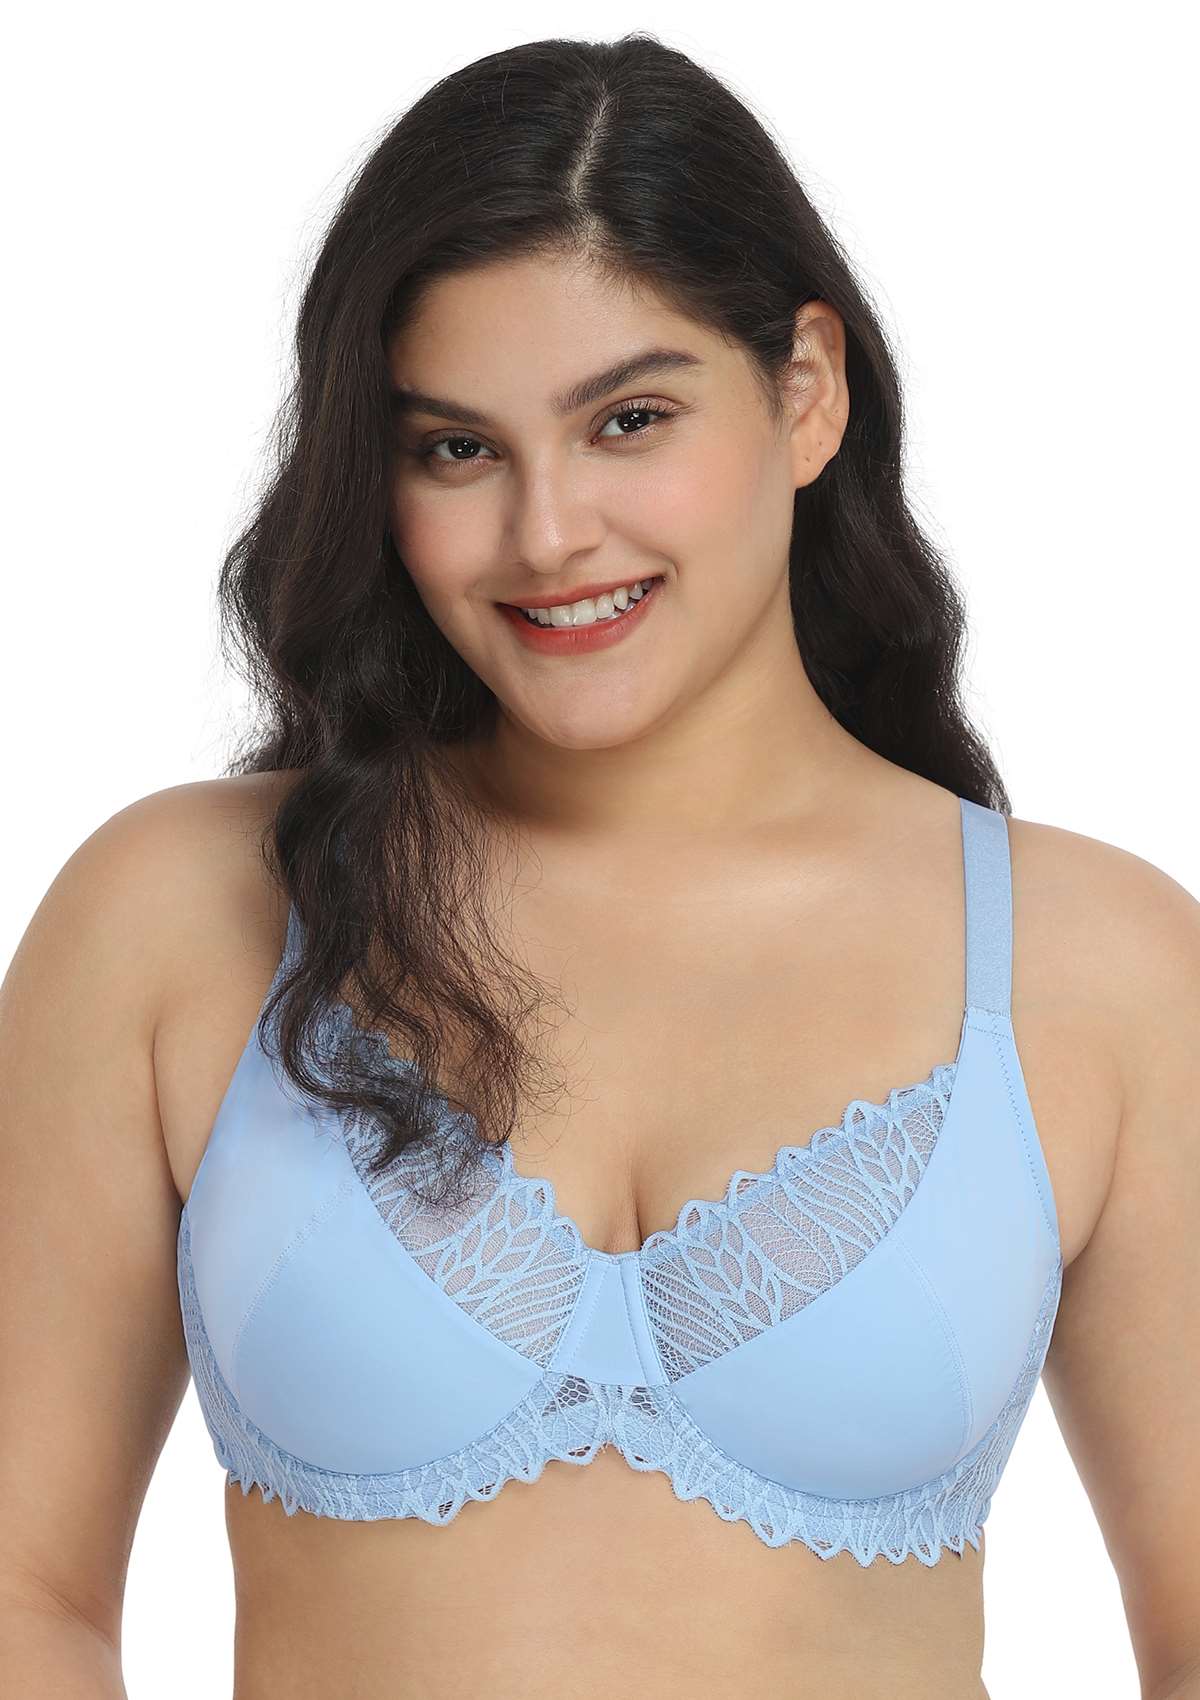 HSIA Pretty Secrets Lace-Trimmed Full Coverage Underwire Bra For Support - Light Pink / 36 / C